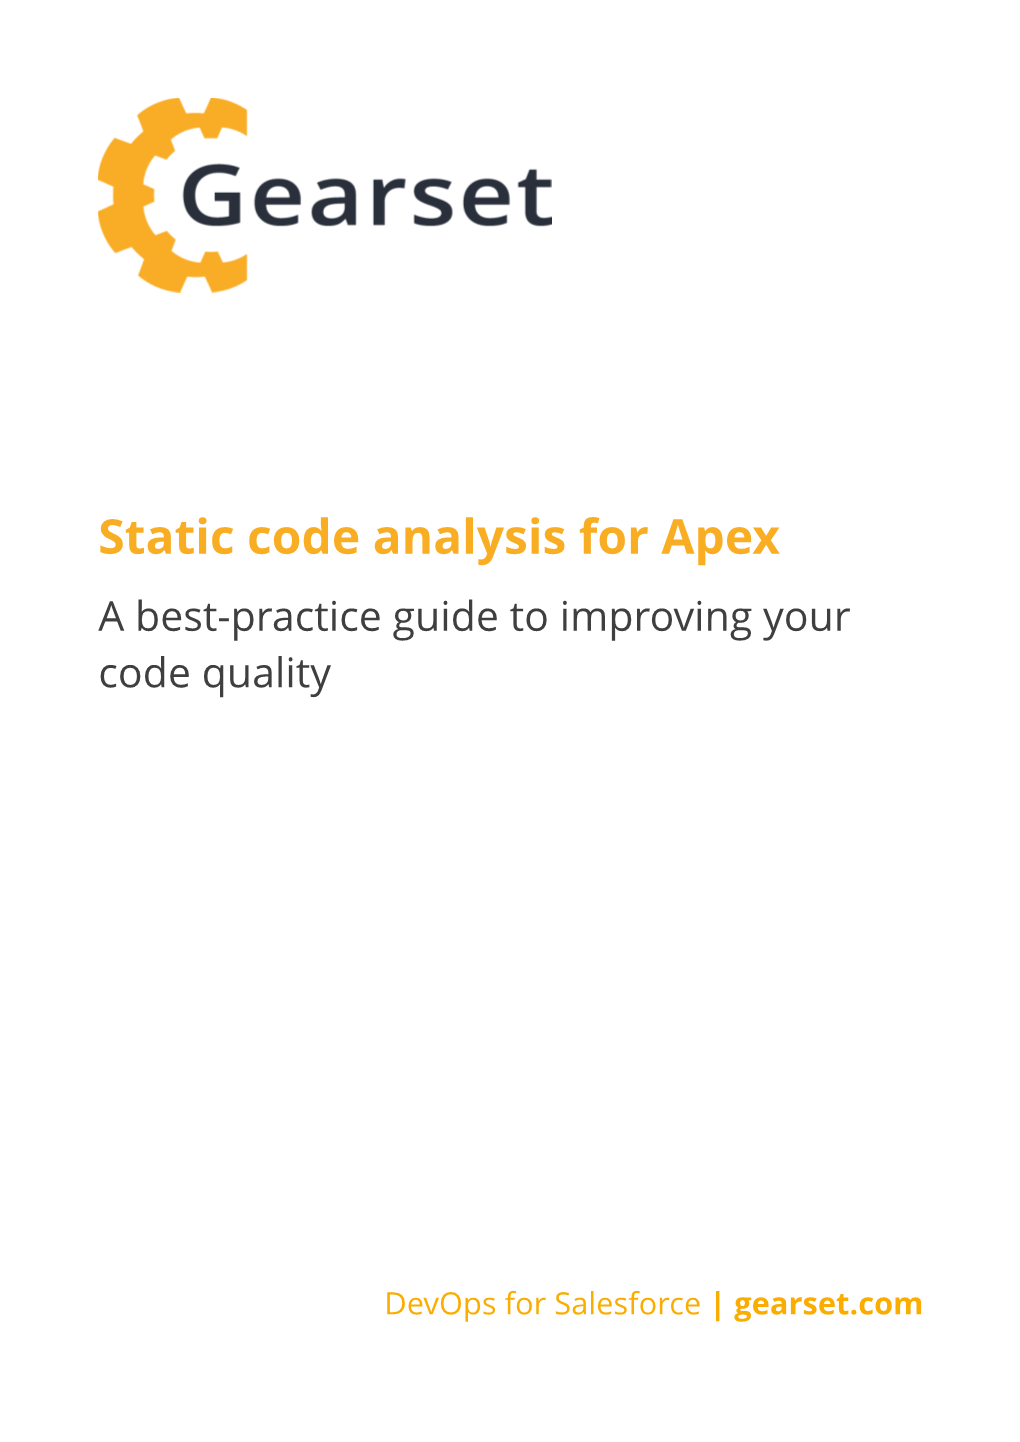 Static Code Analysis for Apex a Best-Practice Guide to Improving Your Code Quality